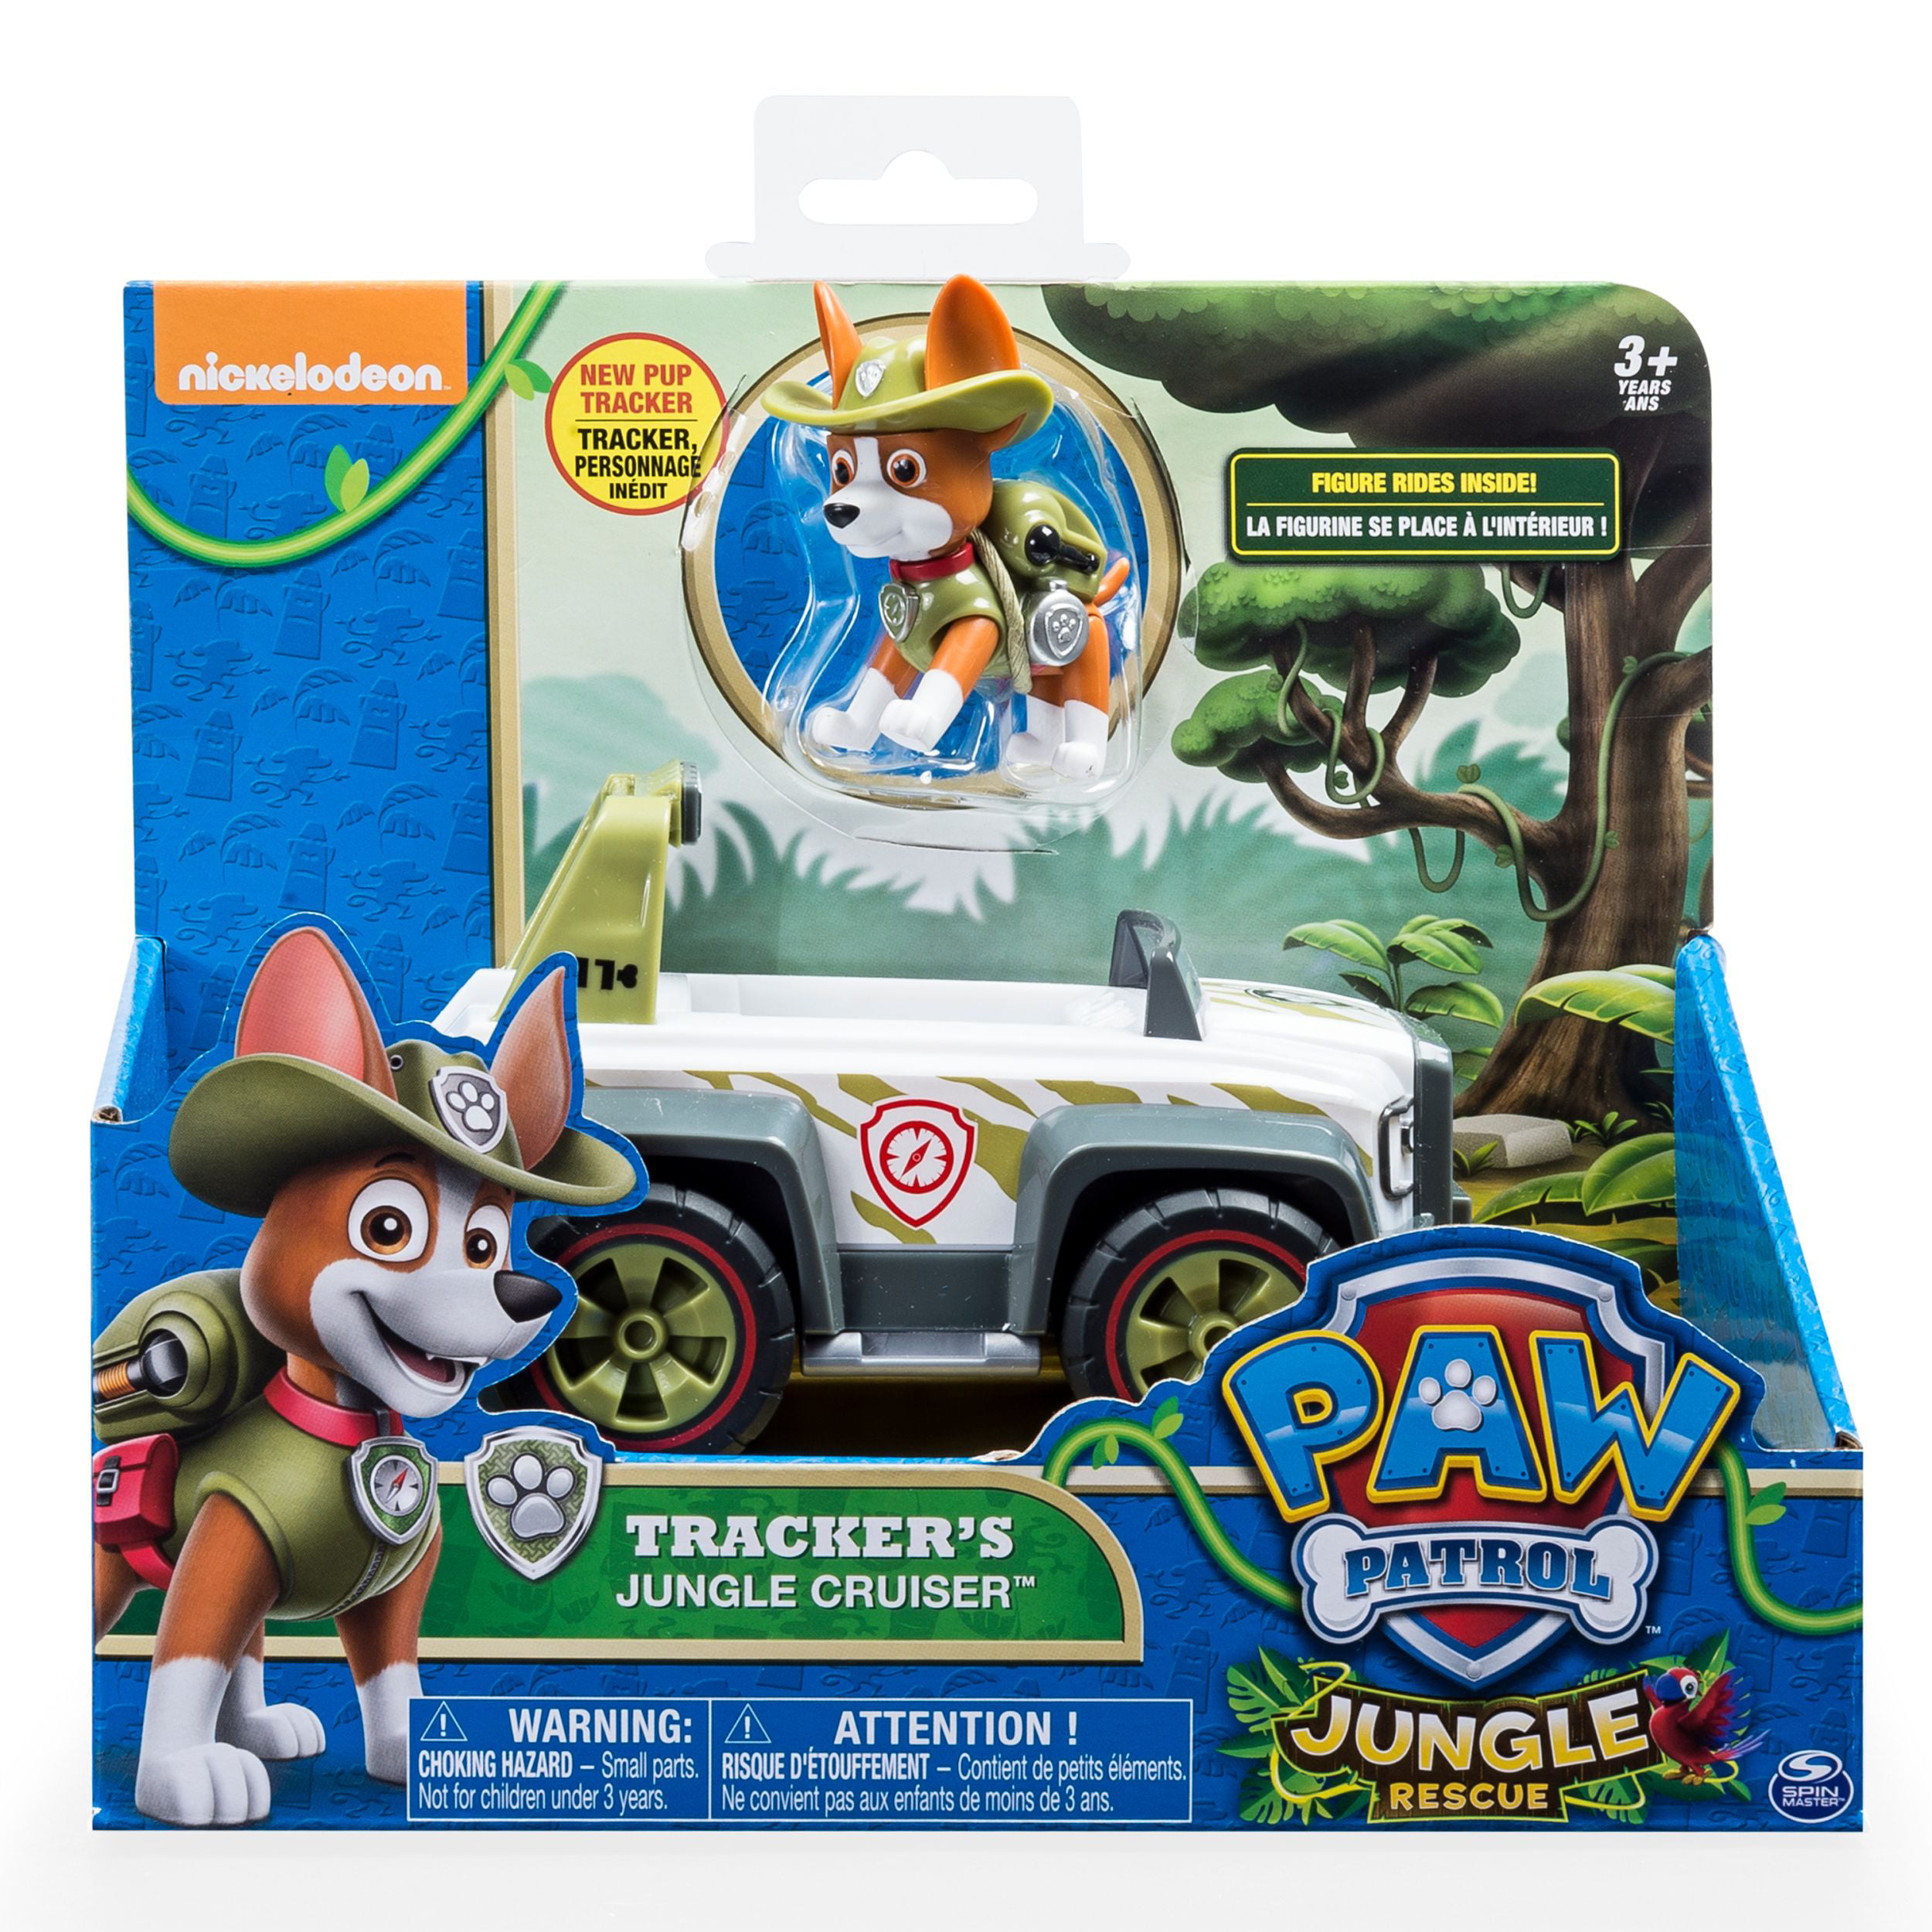 PAW PATROL 6059511 Tracker’s Jungle Cruiser Vehicle with Collectible Figure